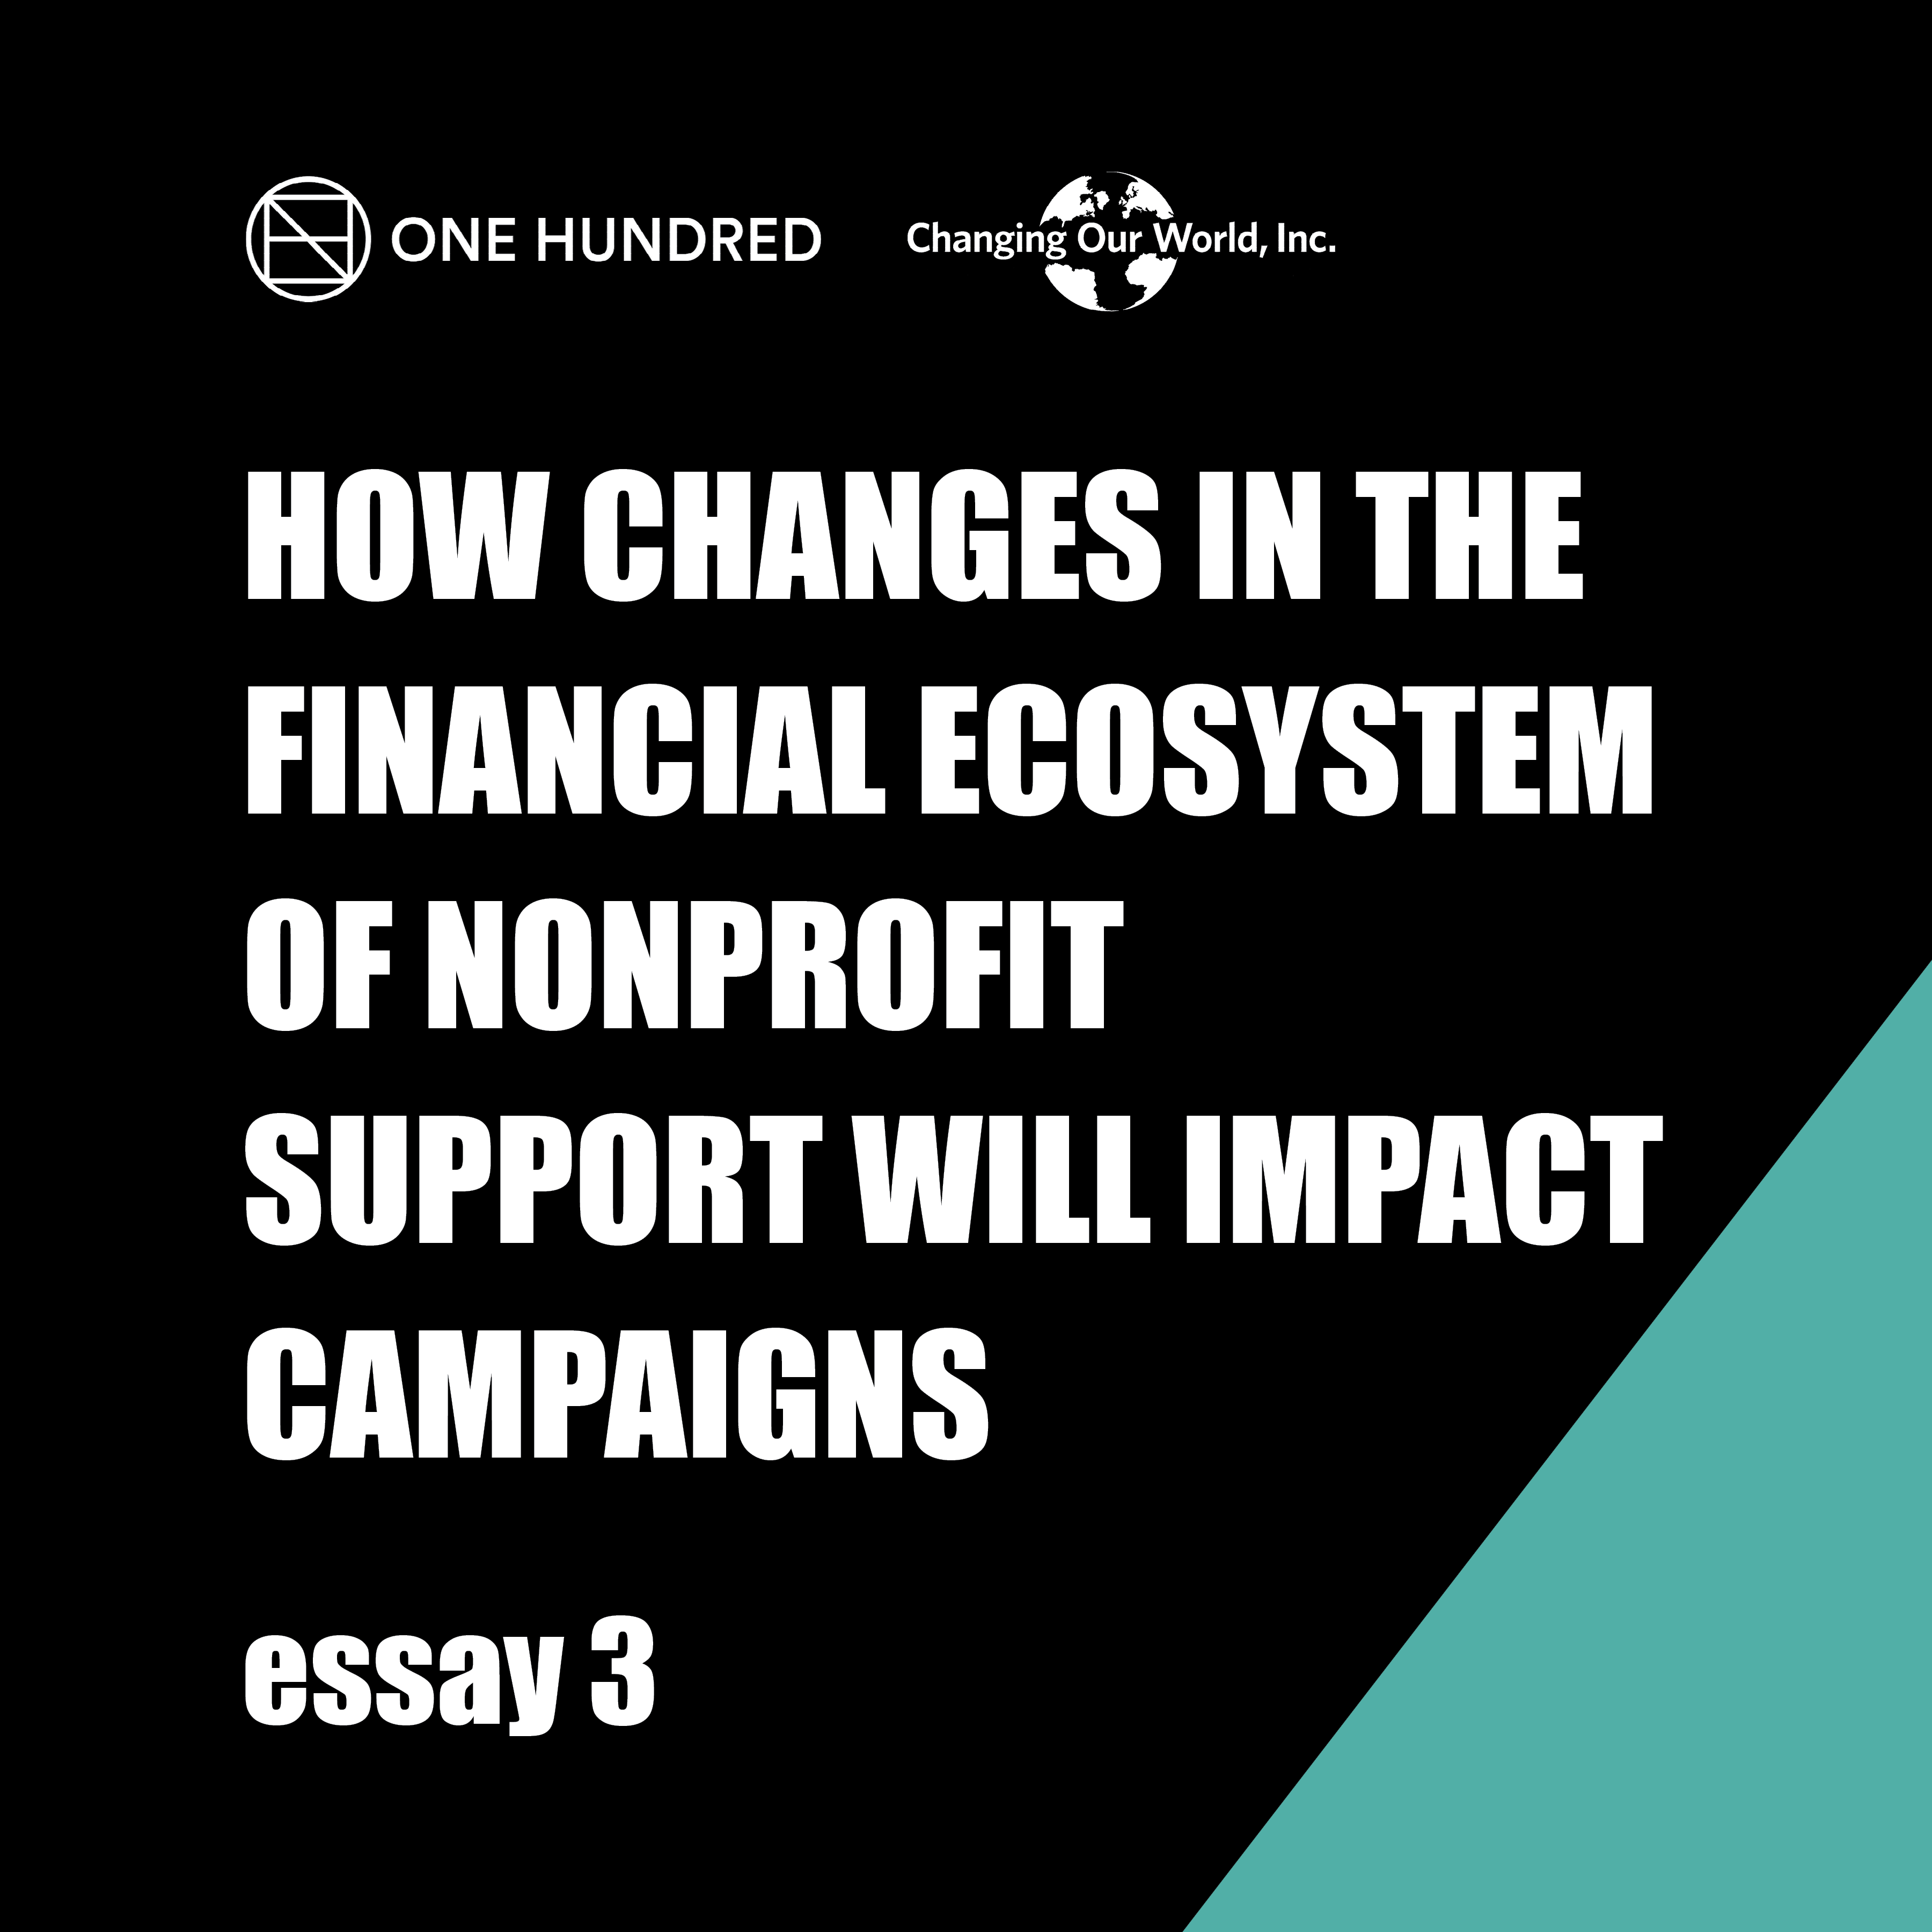 How changes in the financial ecosystem of nonprofit support will impact campaigns.